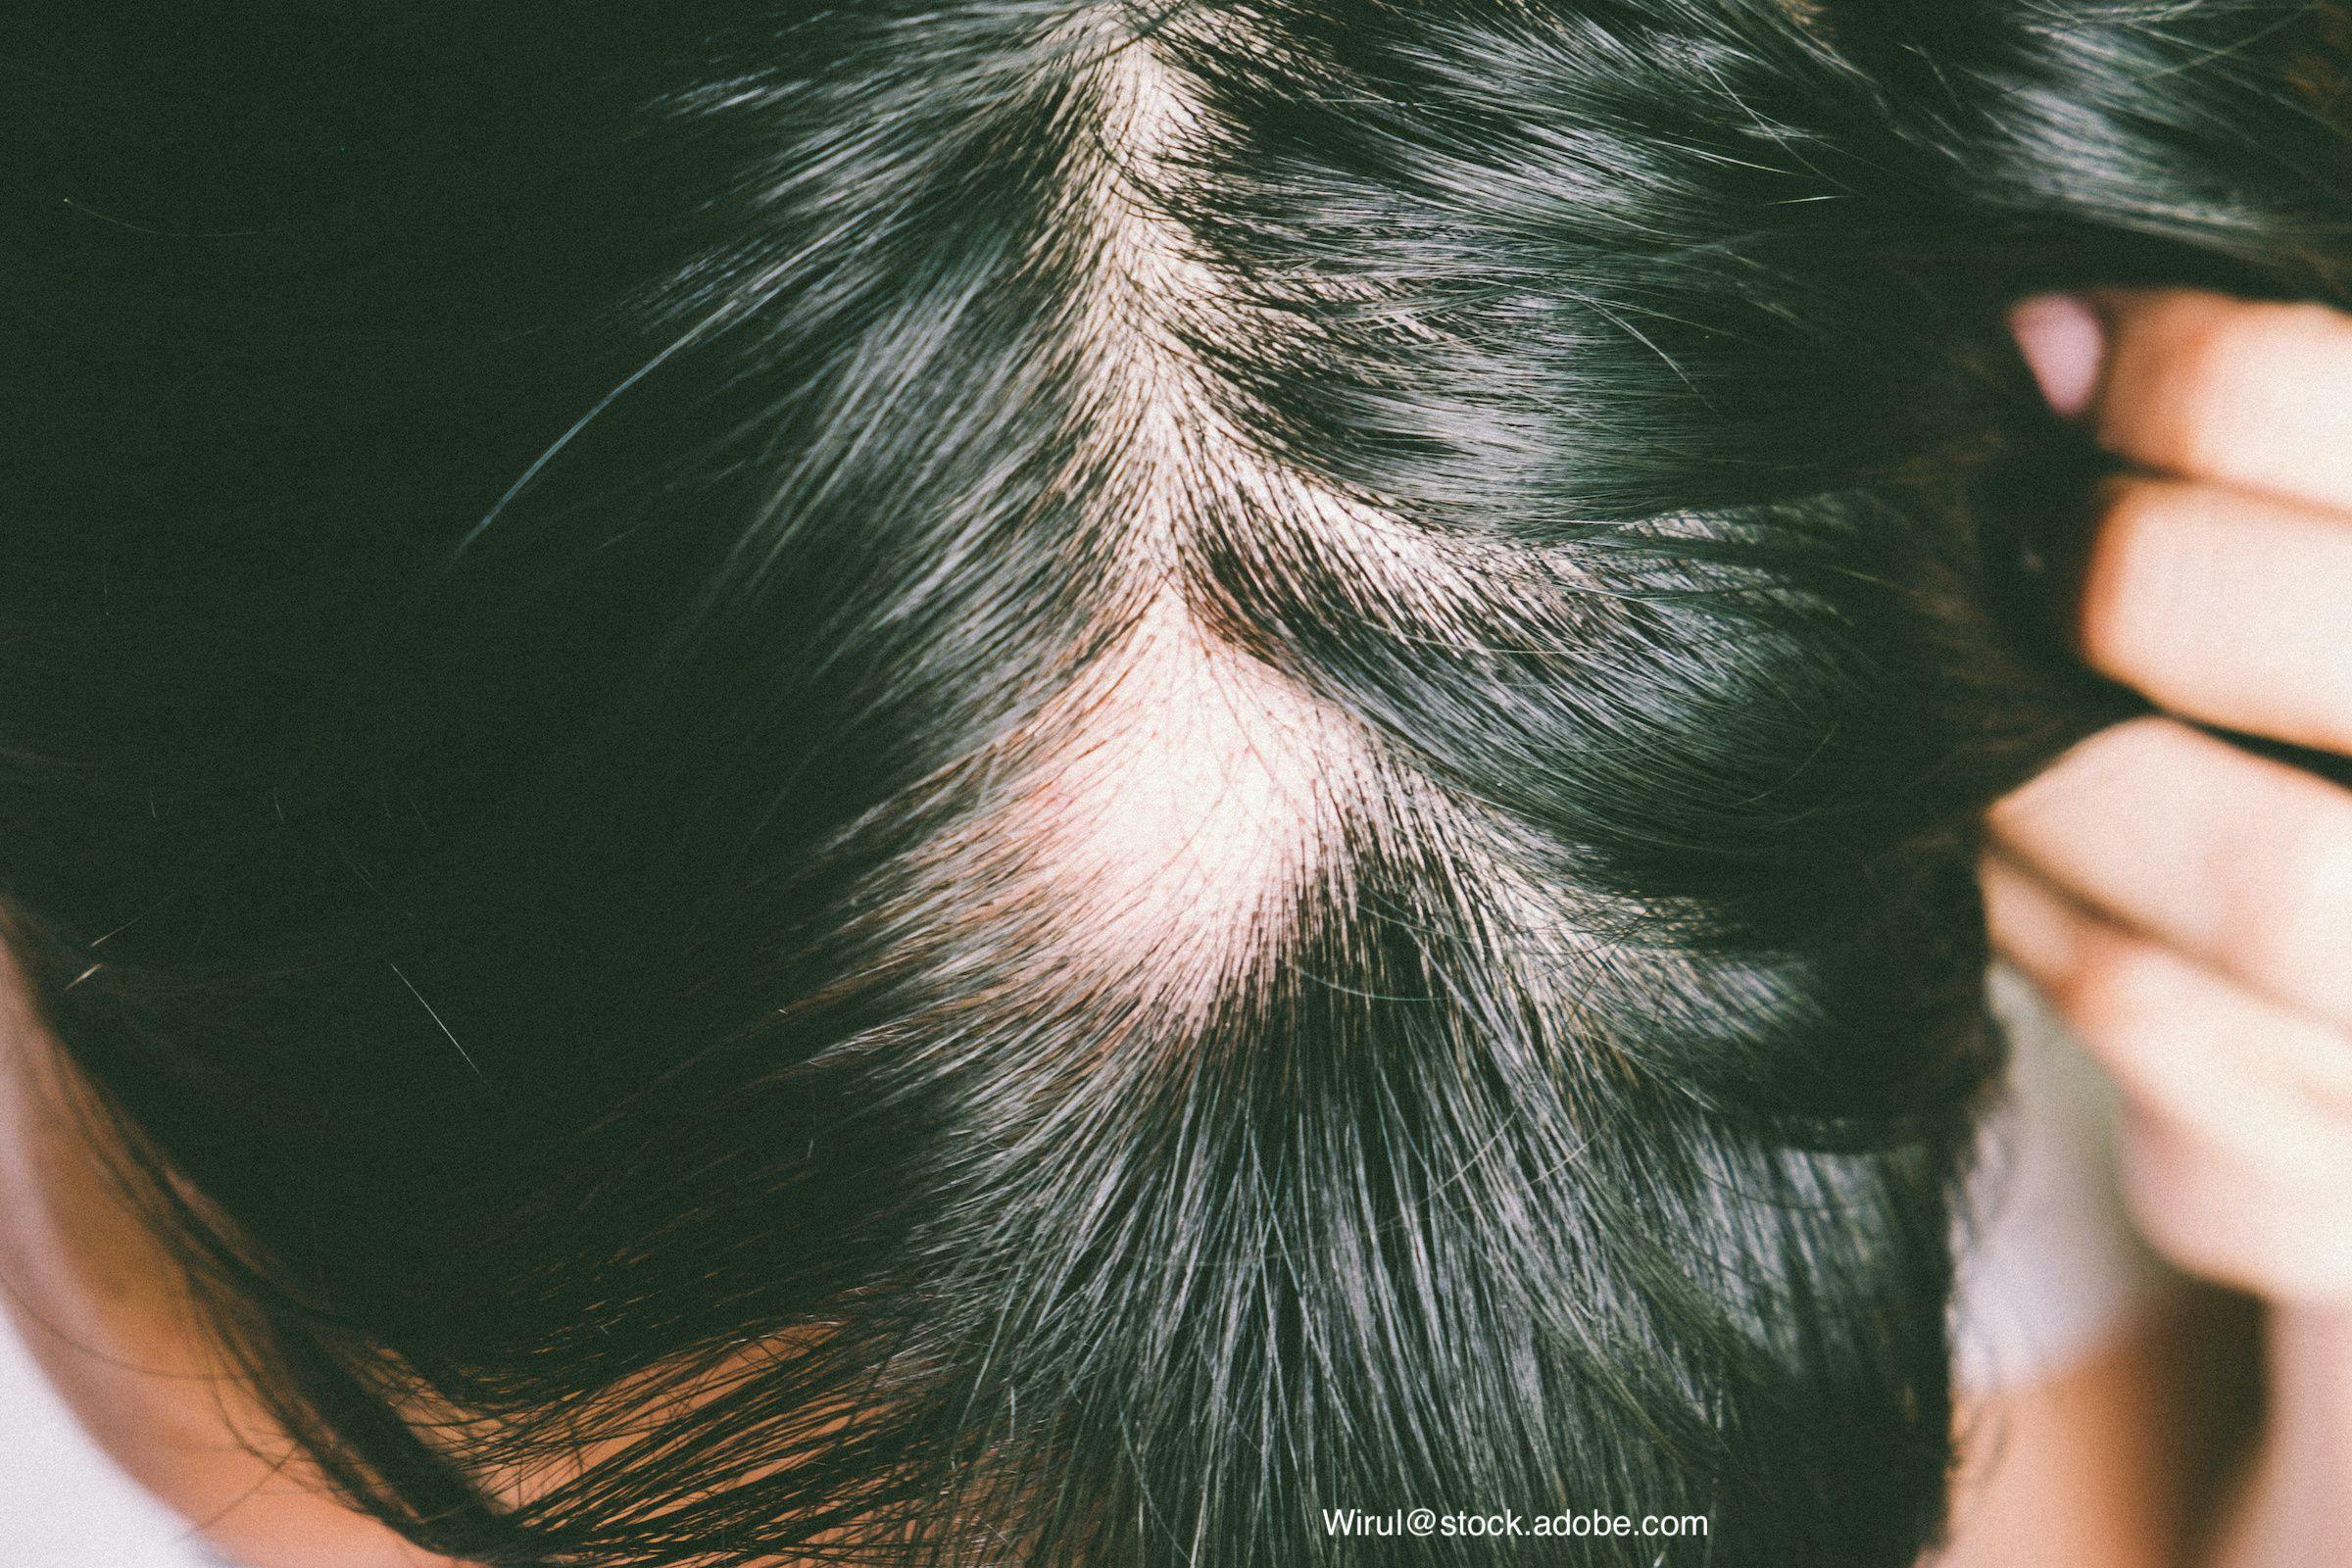 Determining the incidence and prevalence of alopecia areata